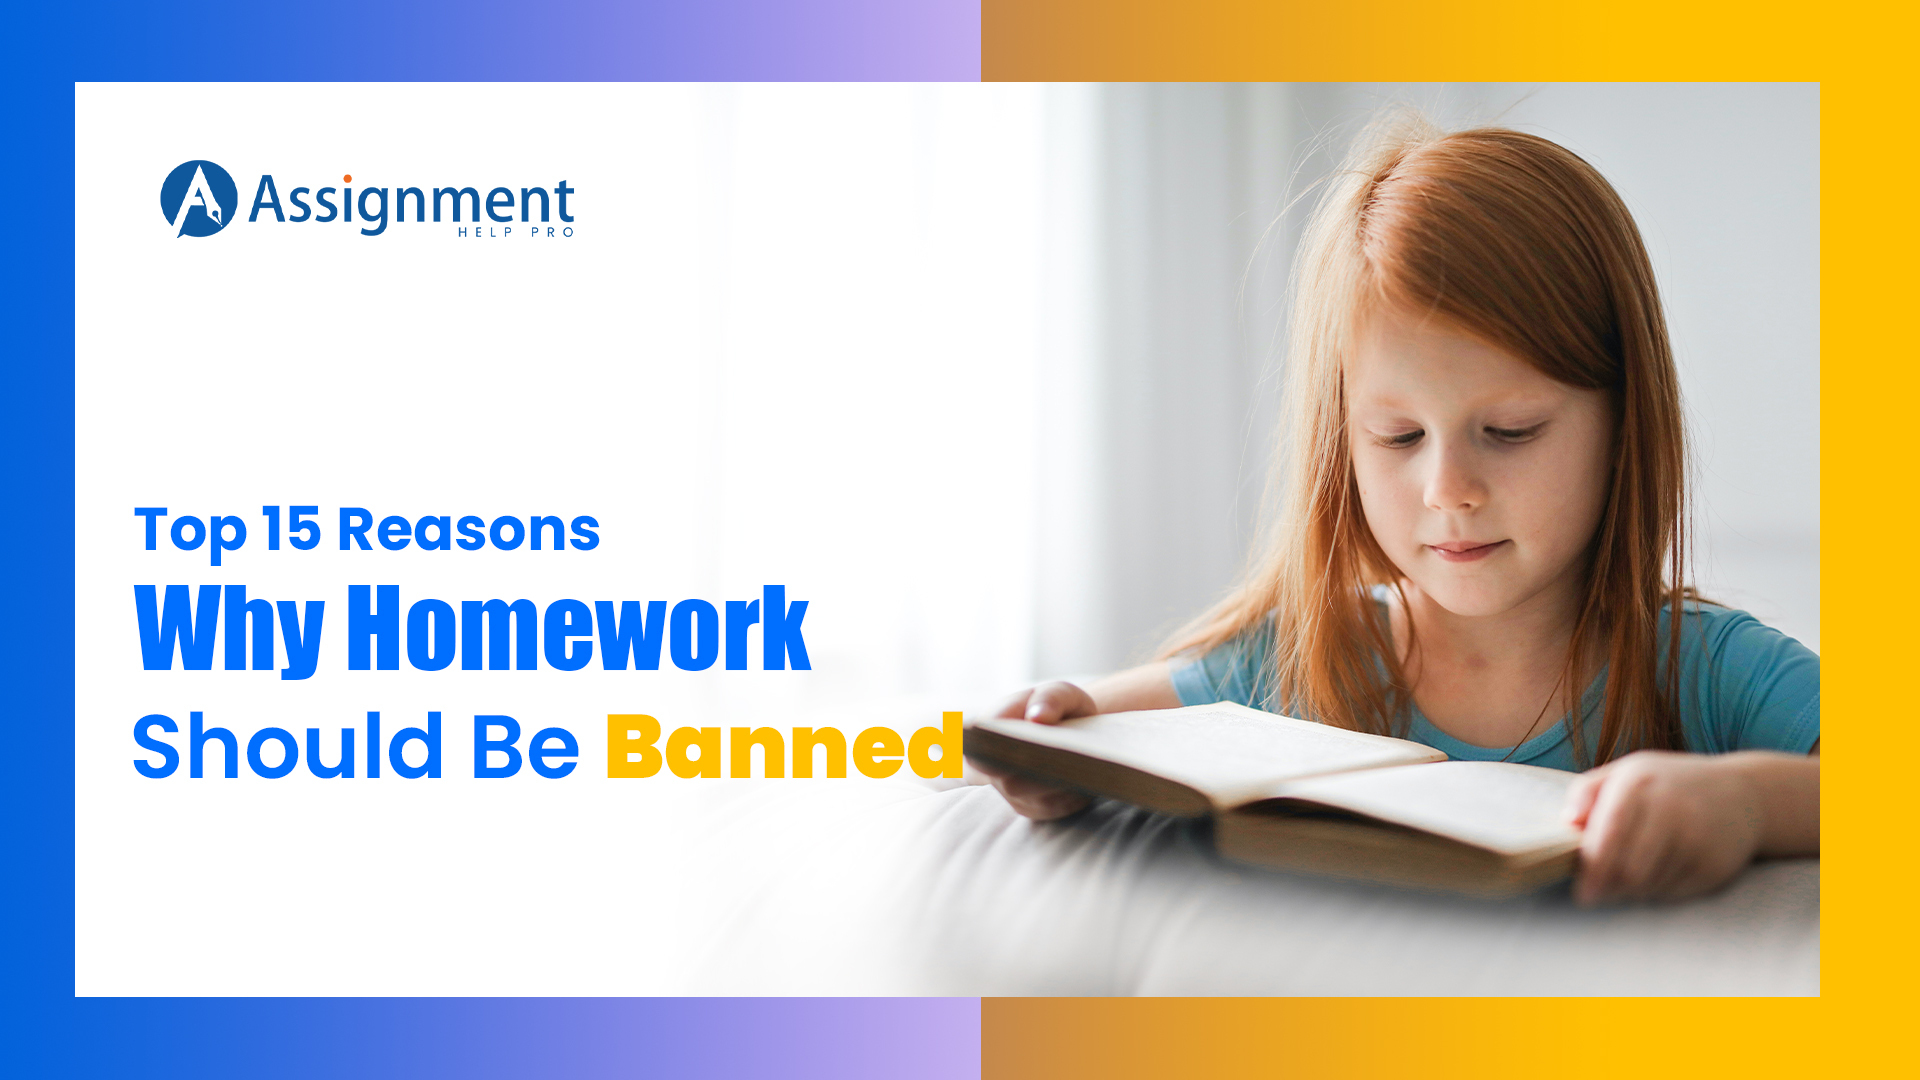 homework should be banned in school counterclaim